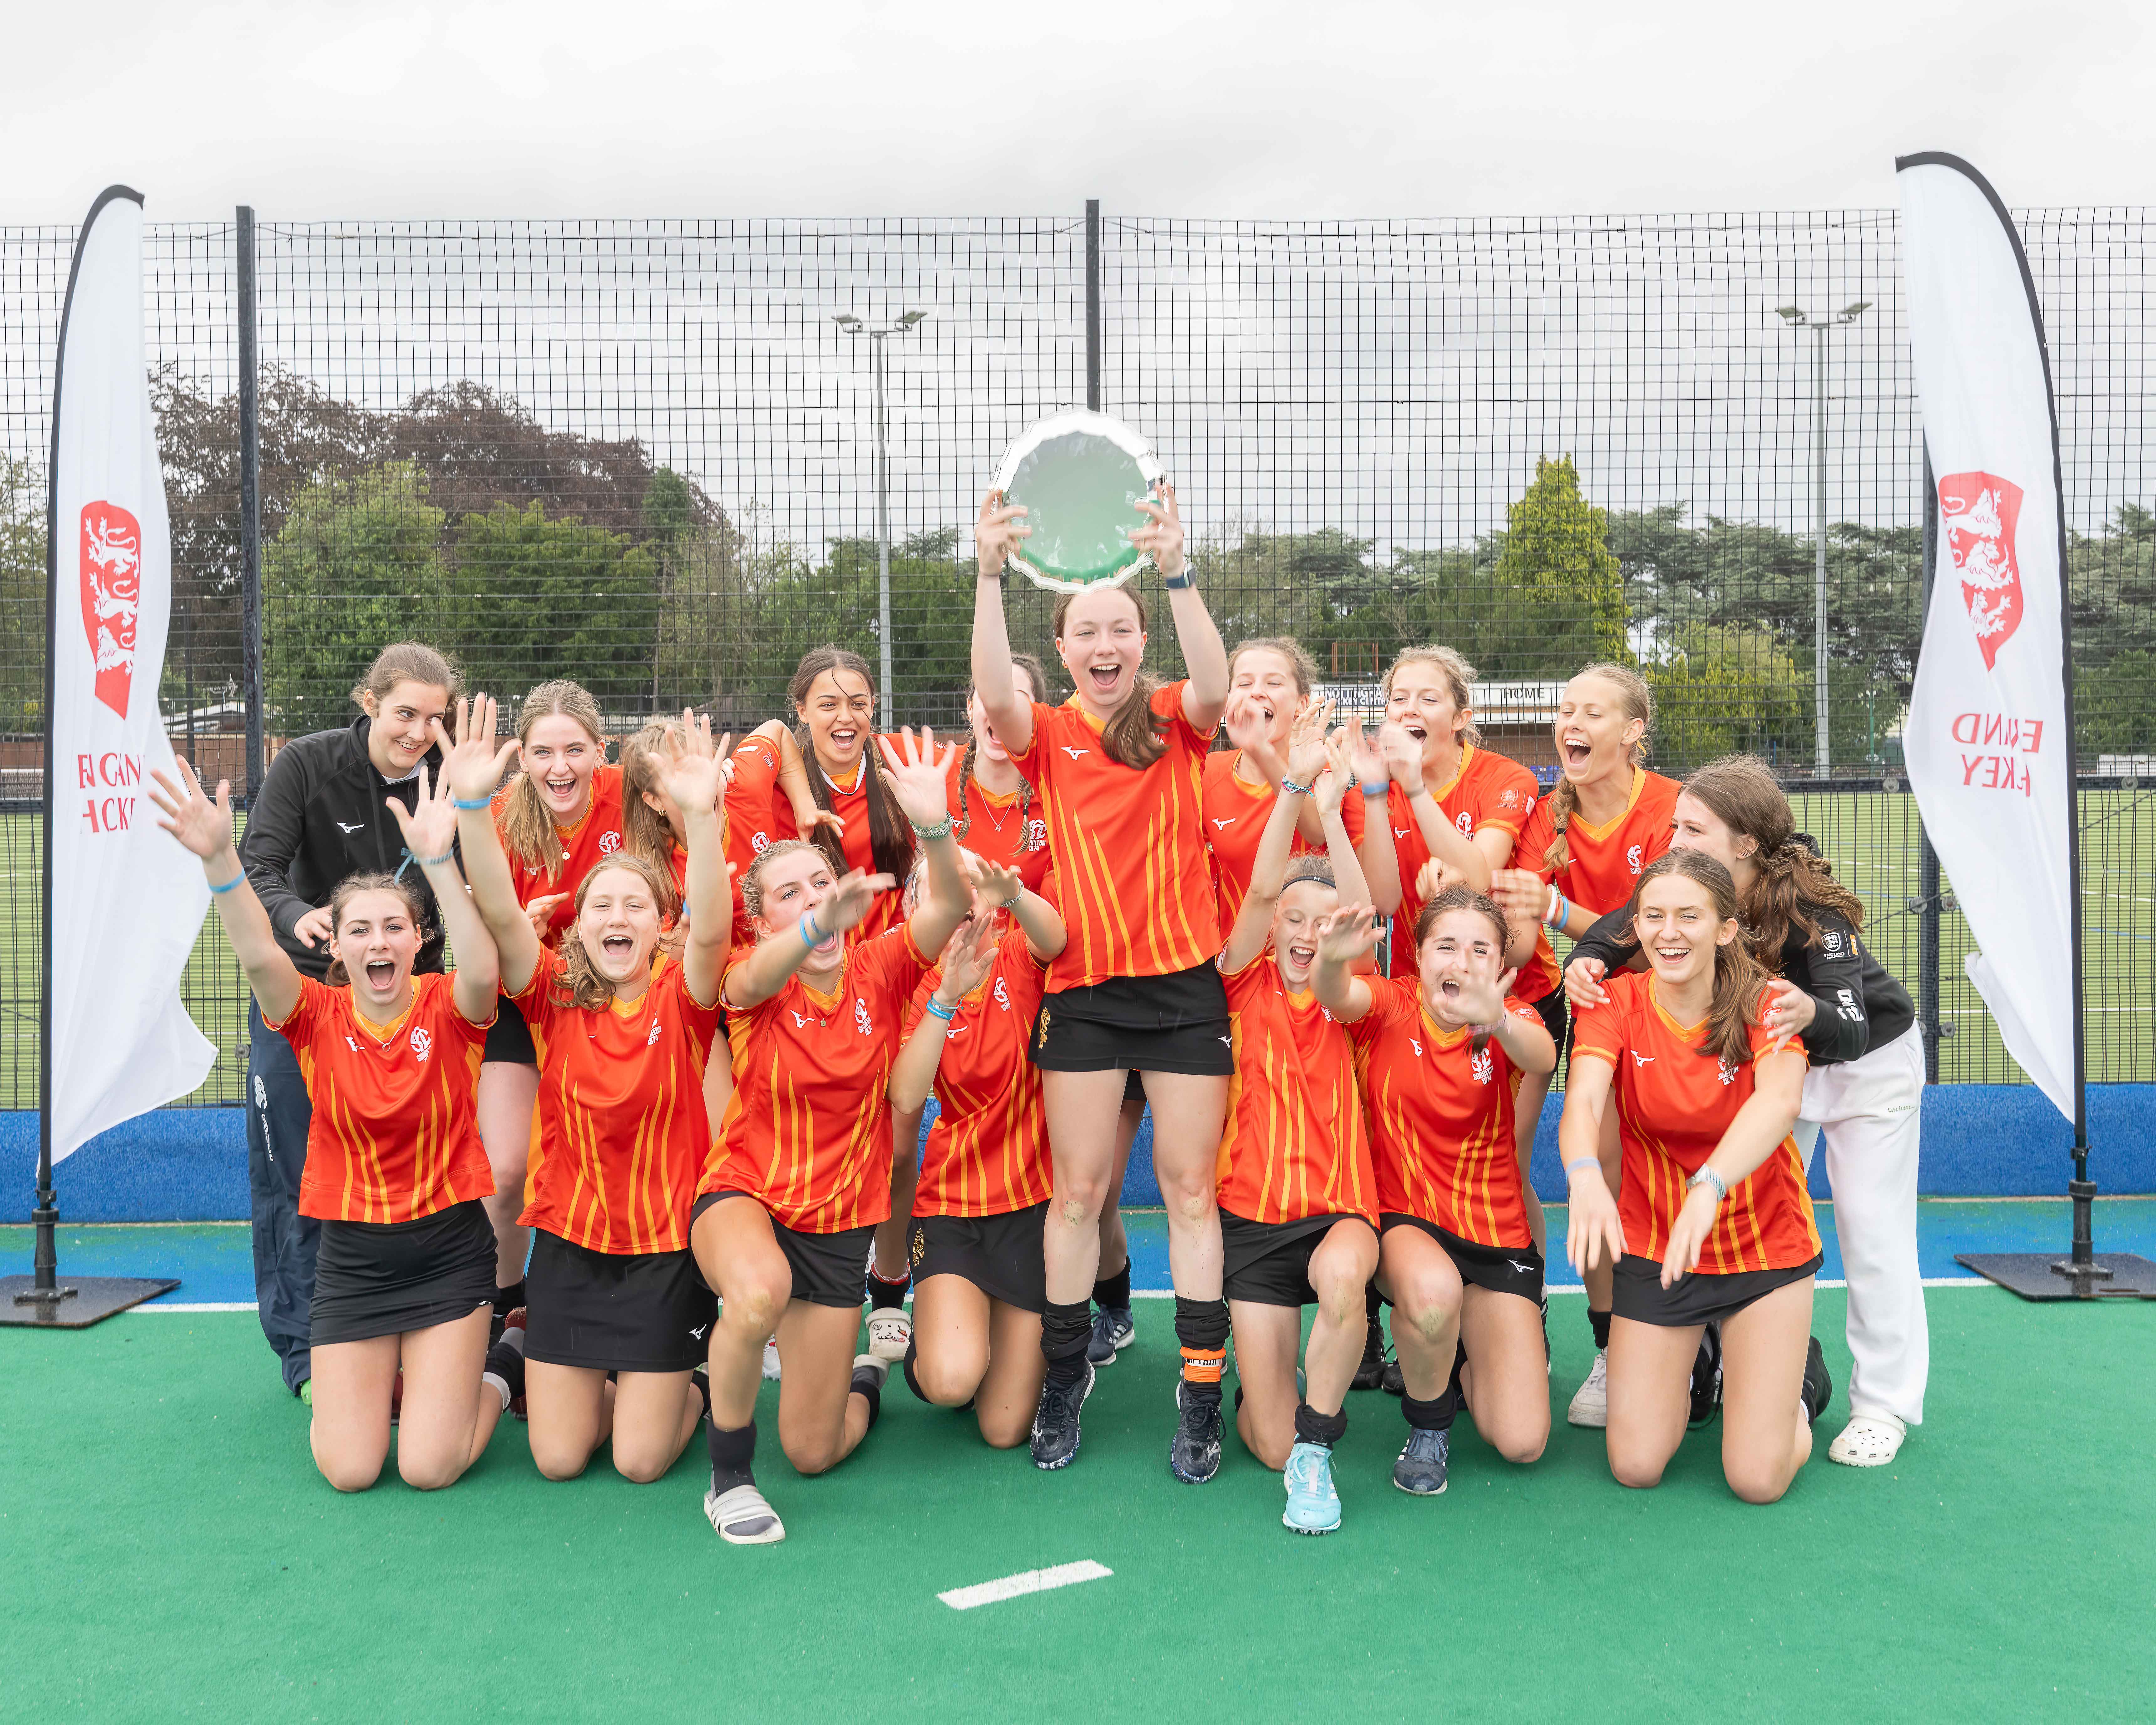 20230730 DPM EHTA Girls Presentations%20%200010 Edit%20copy - England: Building A Person-centred Talent System - Early Signs Of Success - An athlete-centred approach involving increased collaboration is key to the transformation of England Hockey’s talent system and the early signs are promising.   